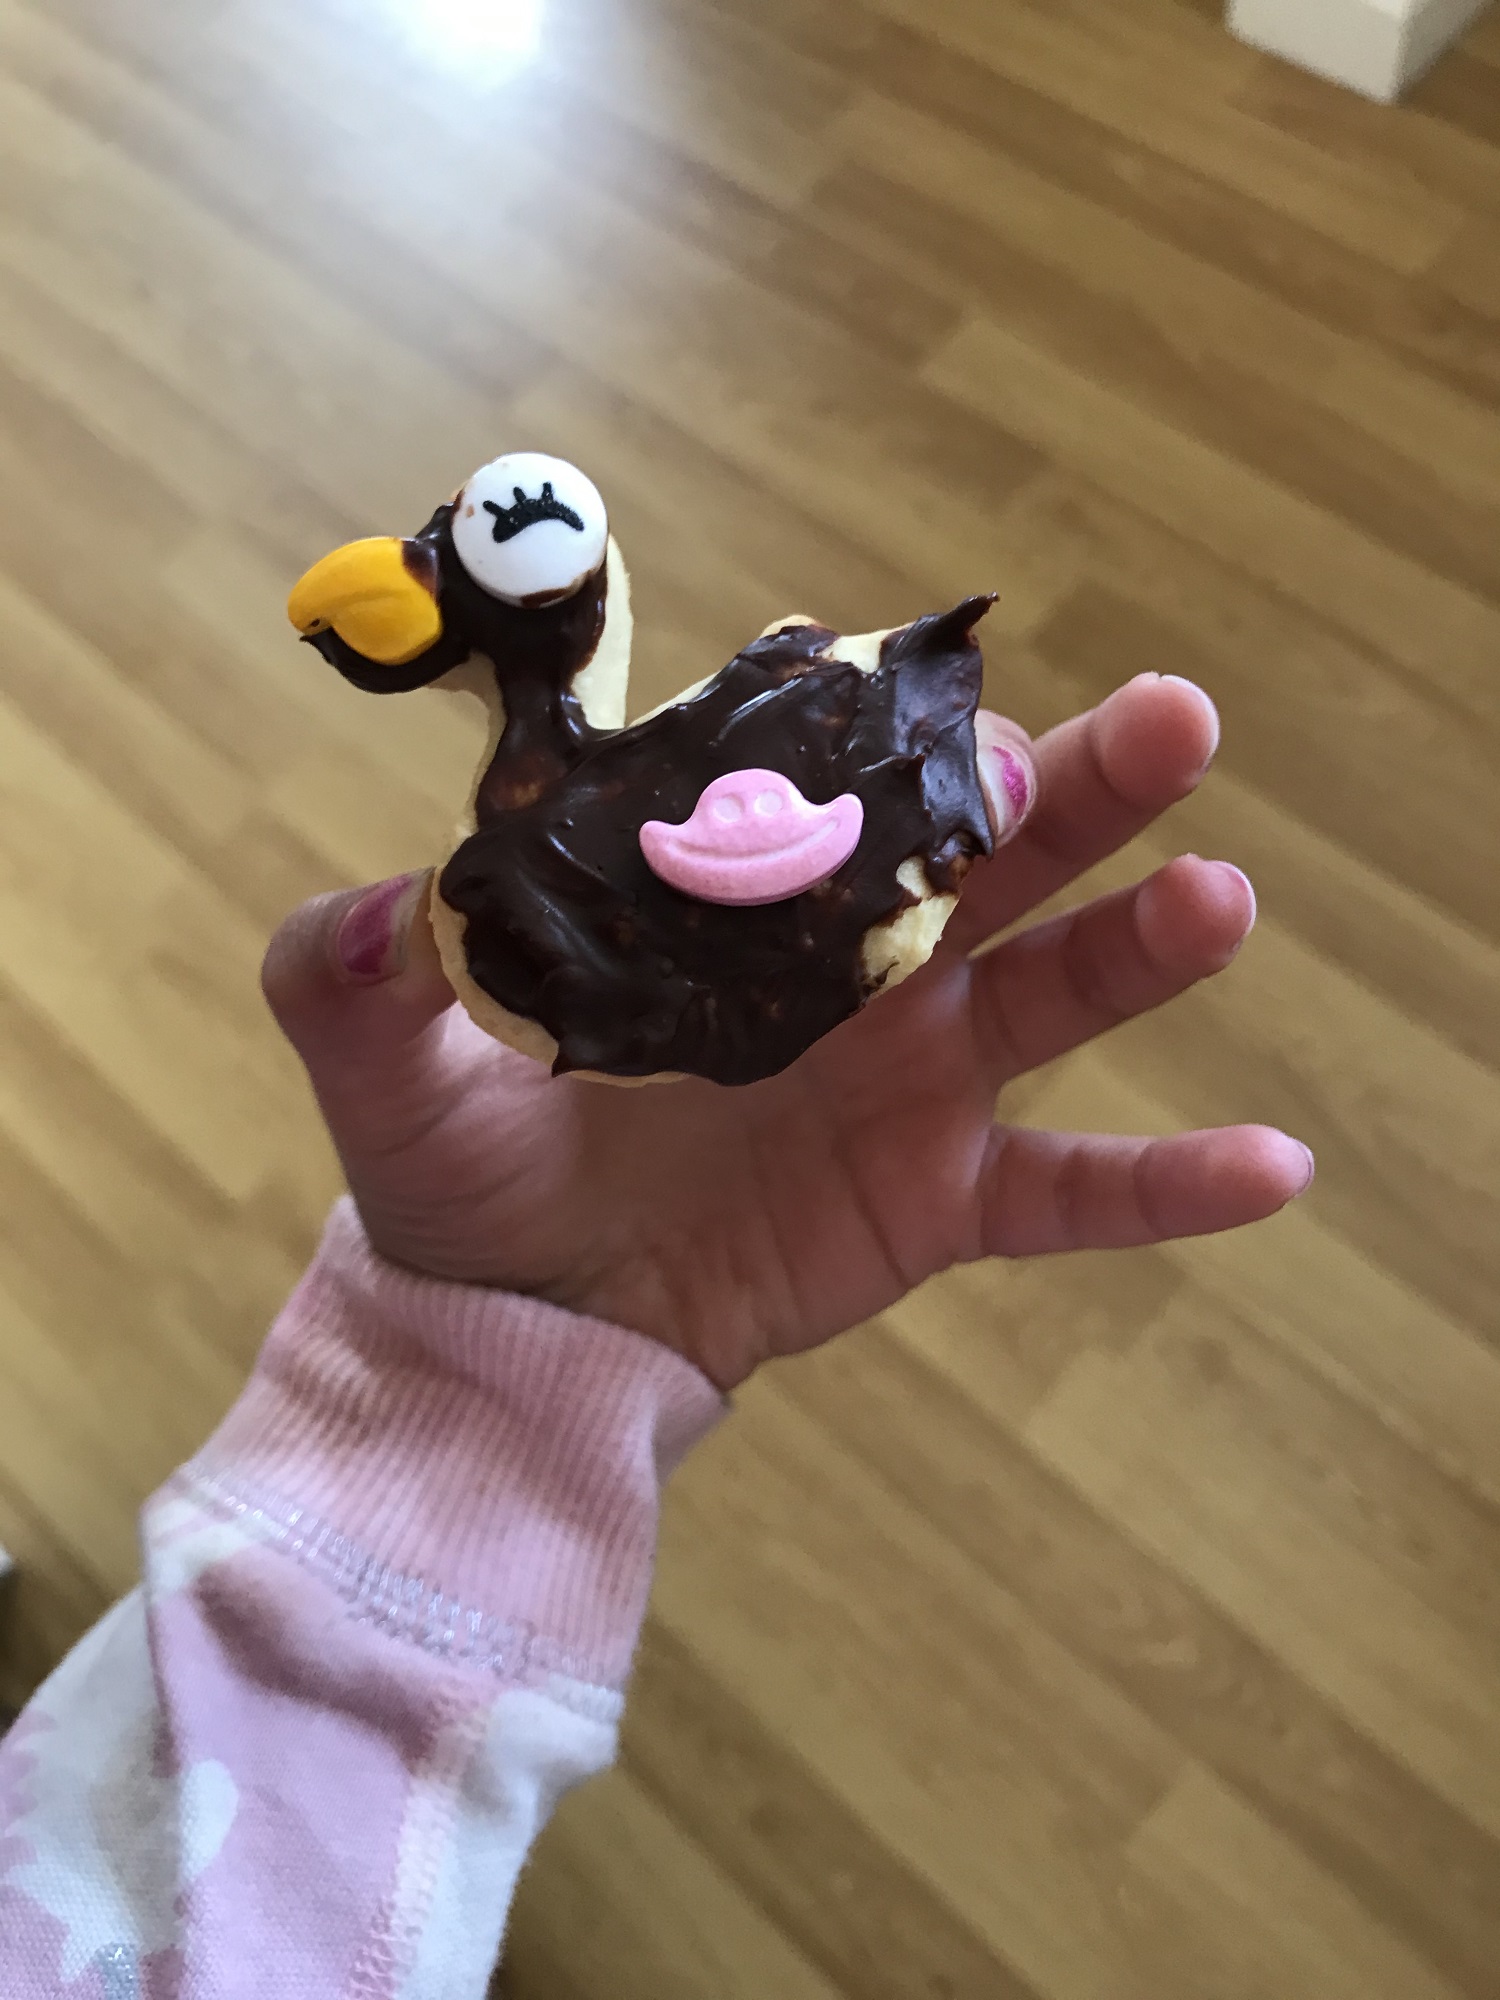 A duck-shaped biscuit is held by a small child. It has been decorated with a bright beak and white head